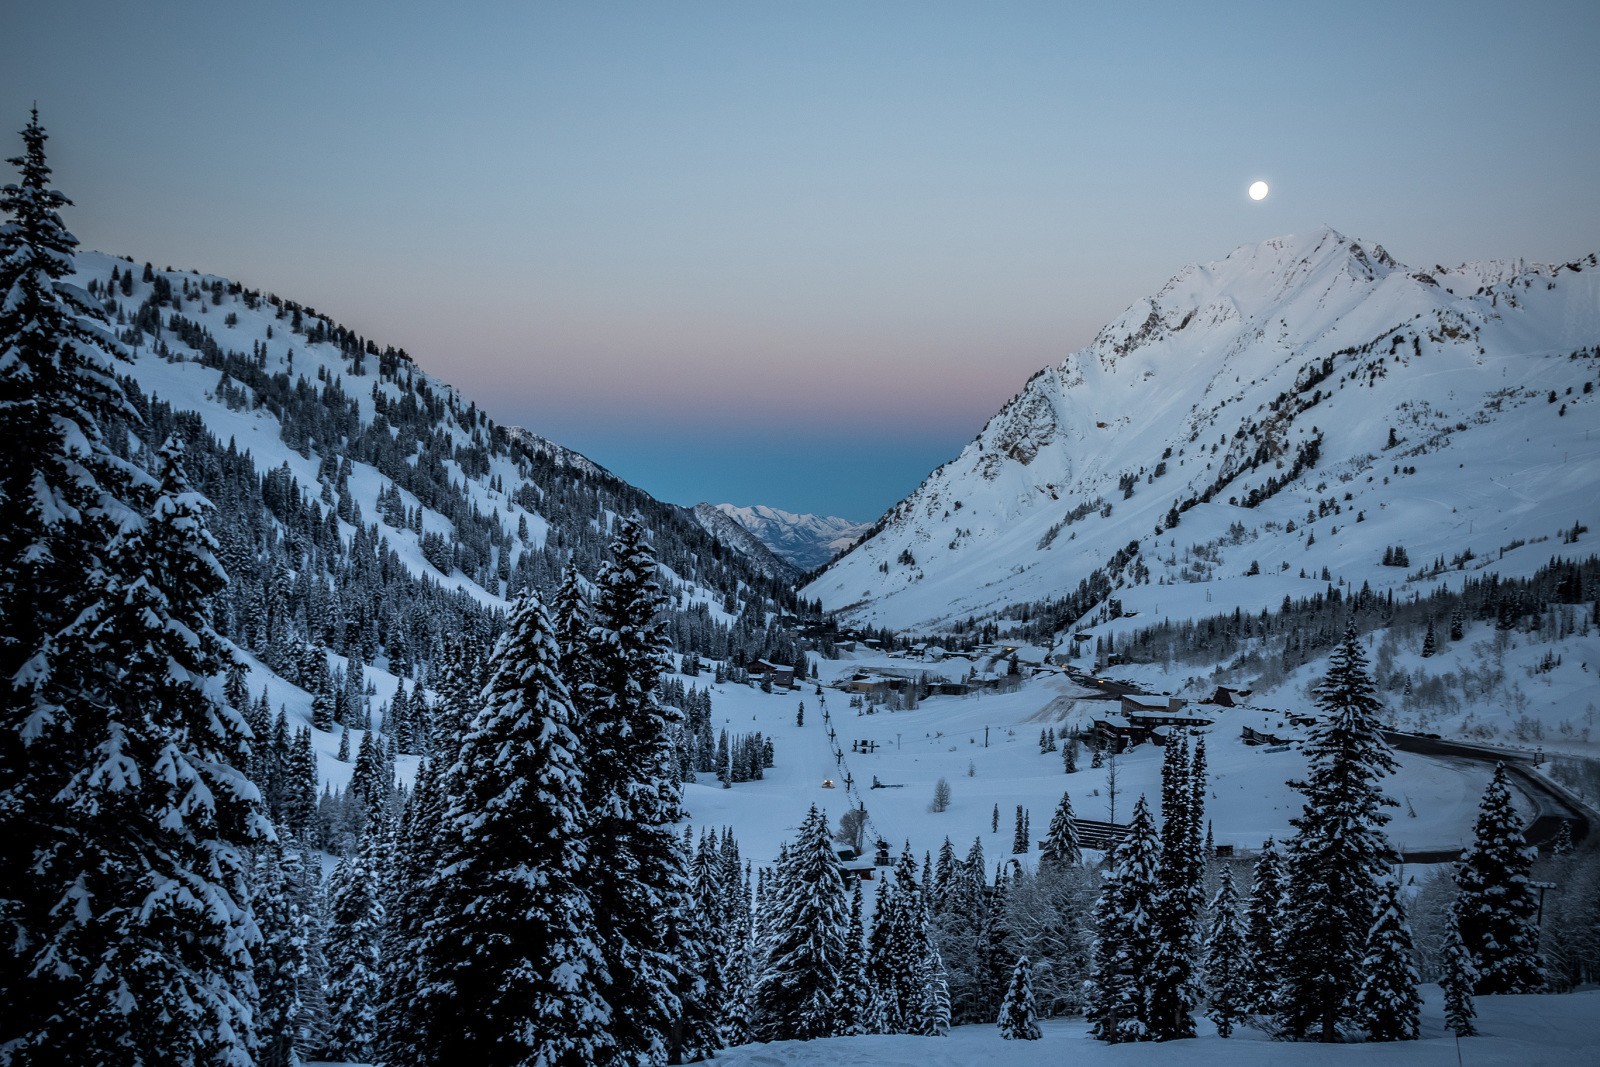 Morning light in Little Cottonwood Canyon